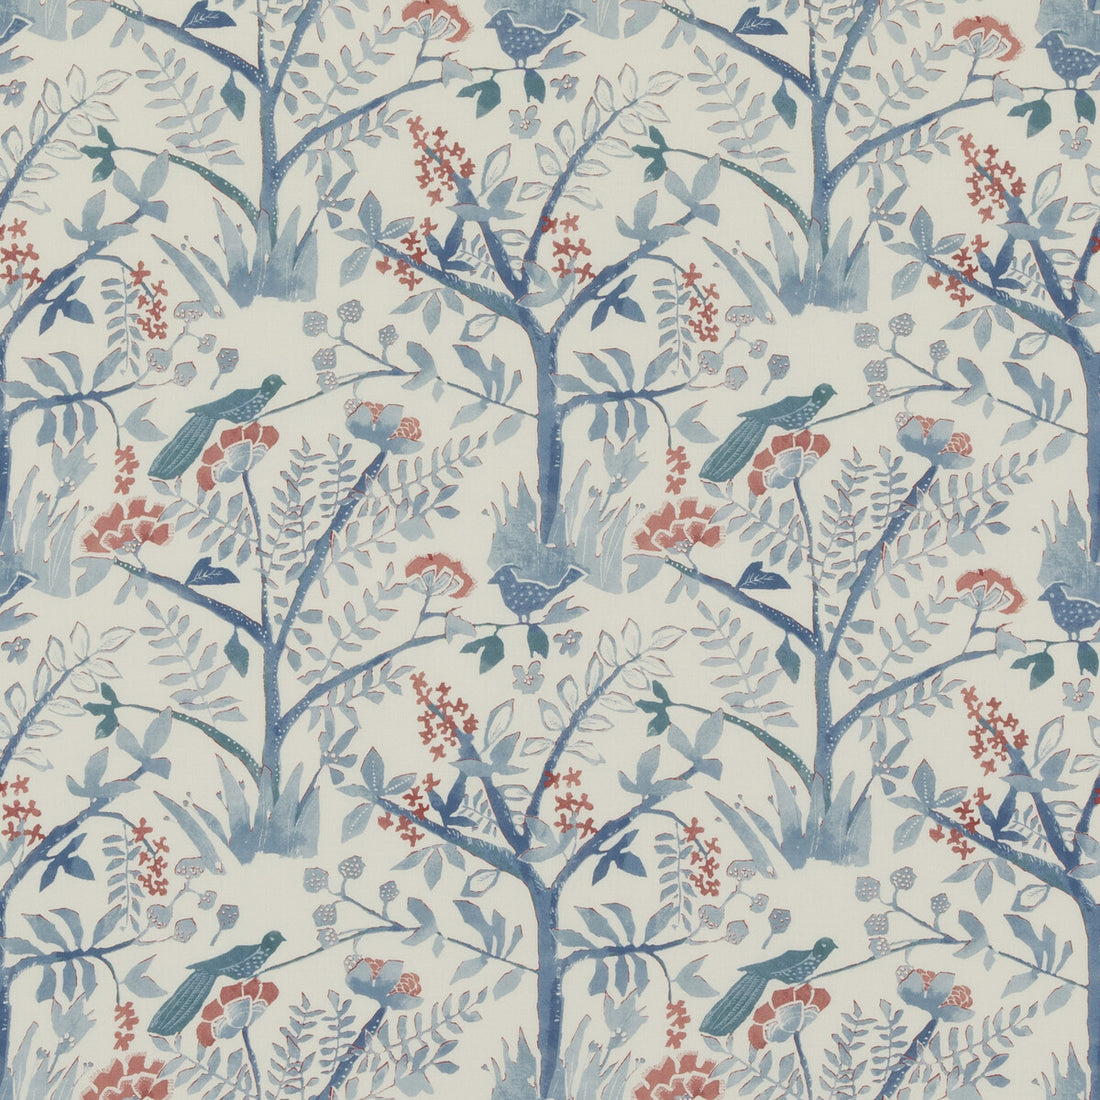 Lulworth fabric in blue/red color - pattern PP50502.1.0 - by Baker Lifestyle in the Bridport collection